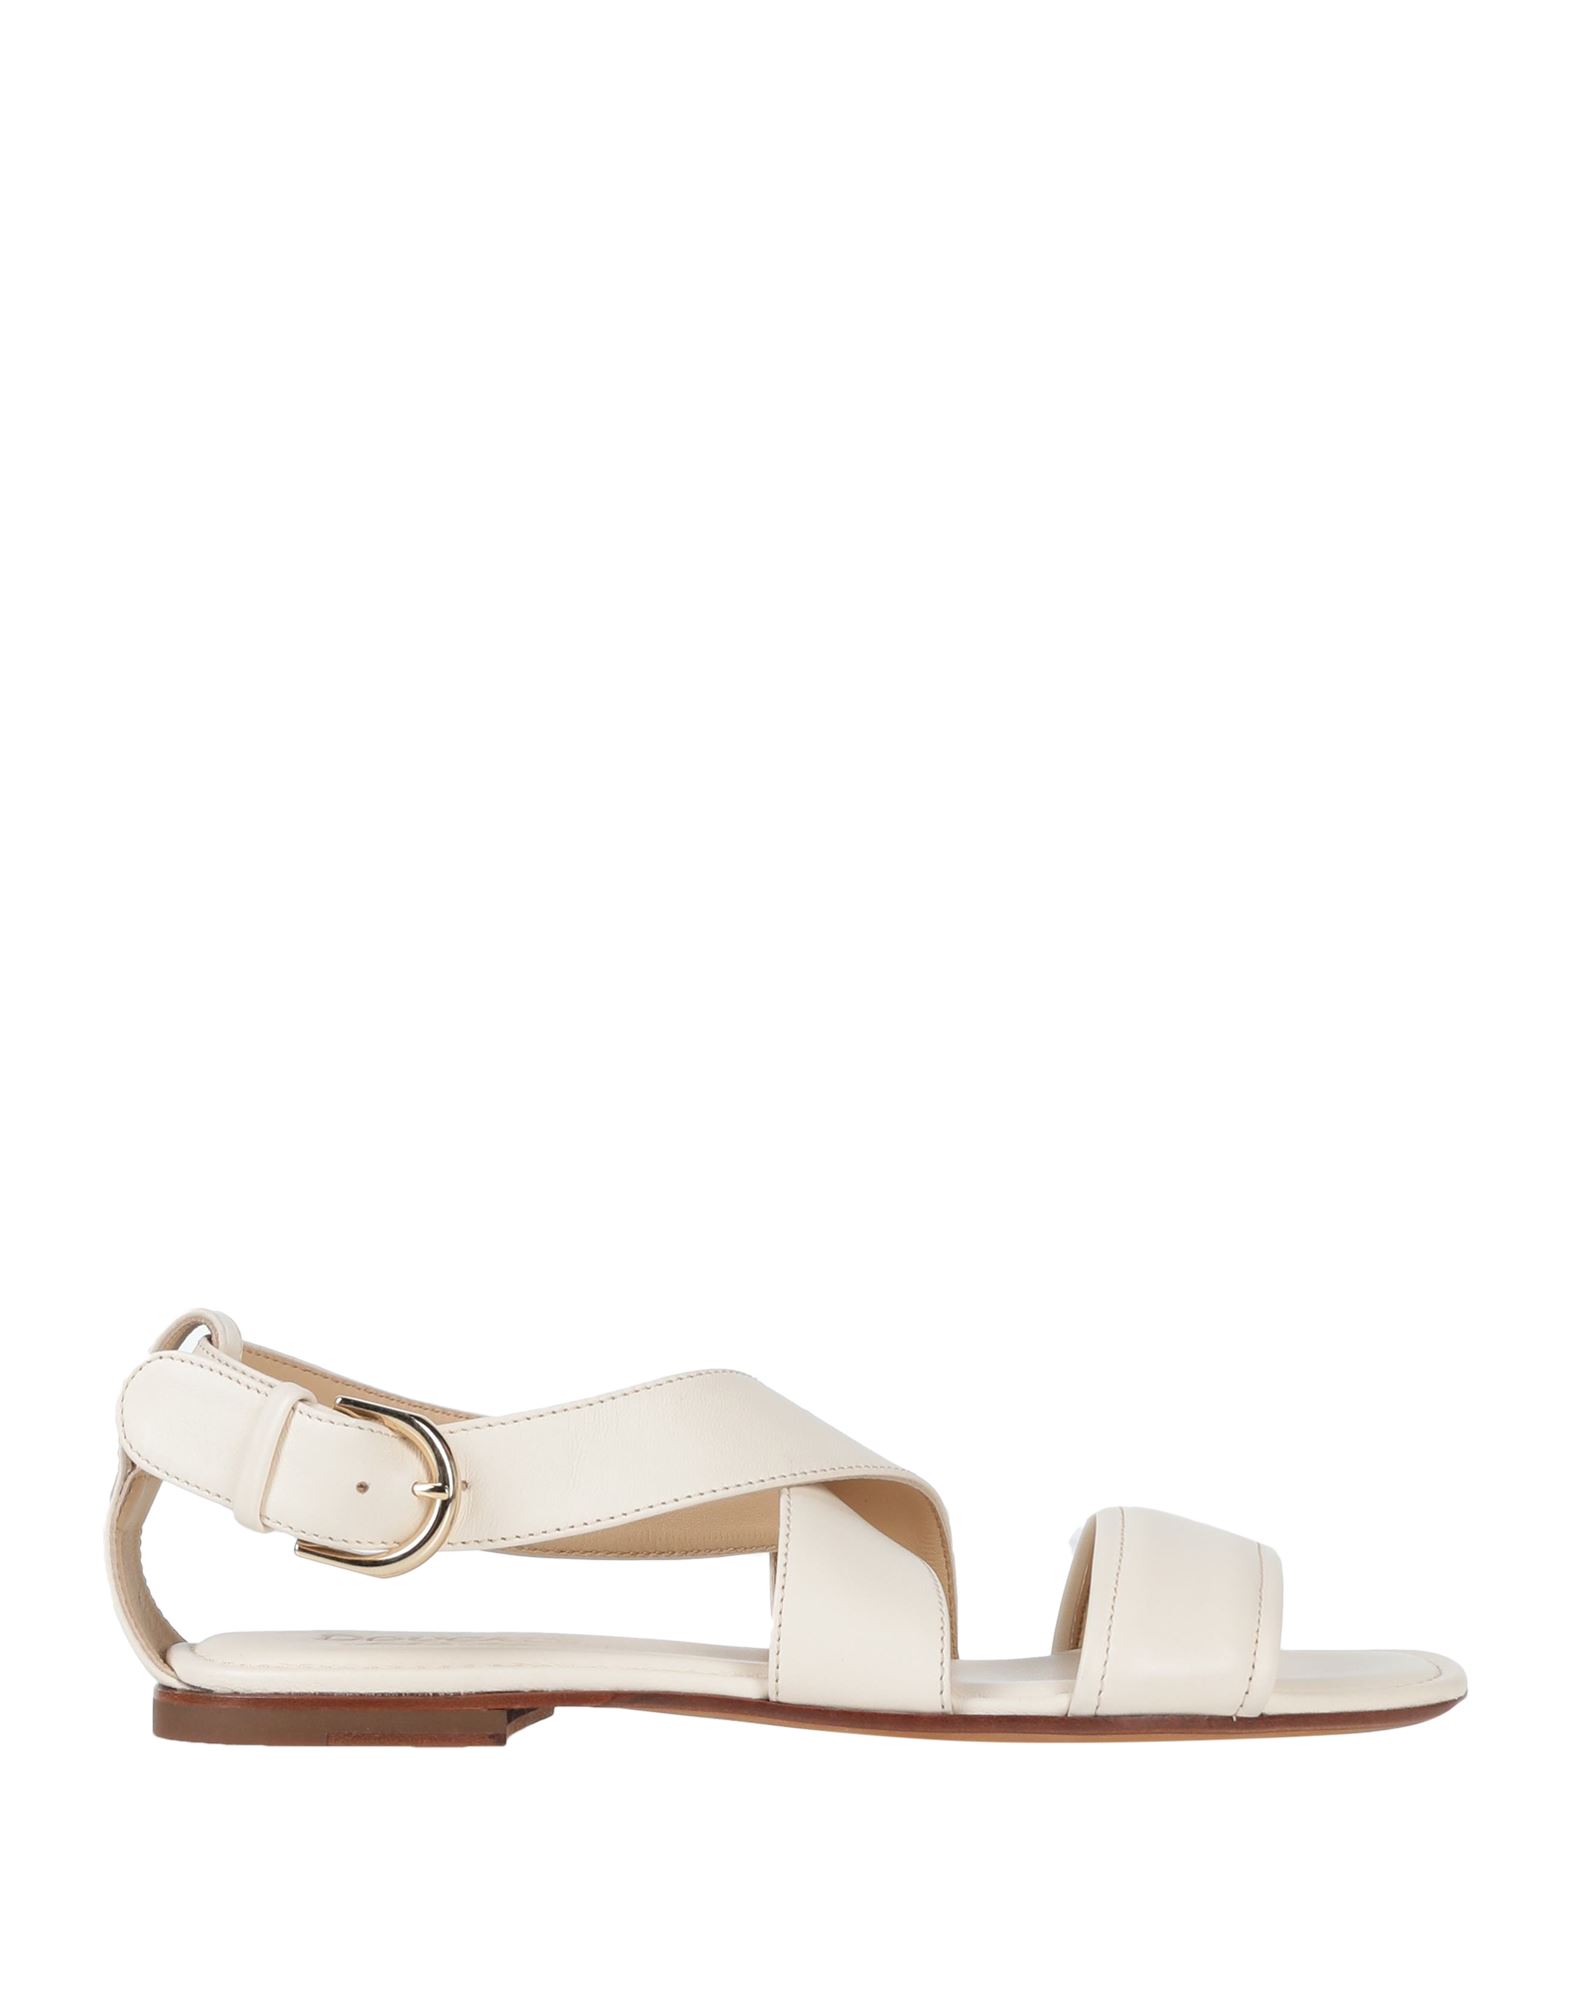 Doucal's Woman Sandals Ivory Size 6 Soft Leather In White